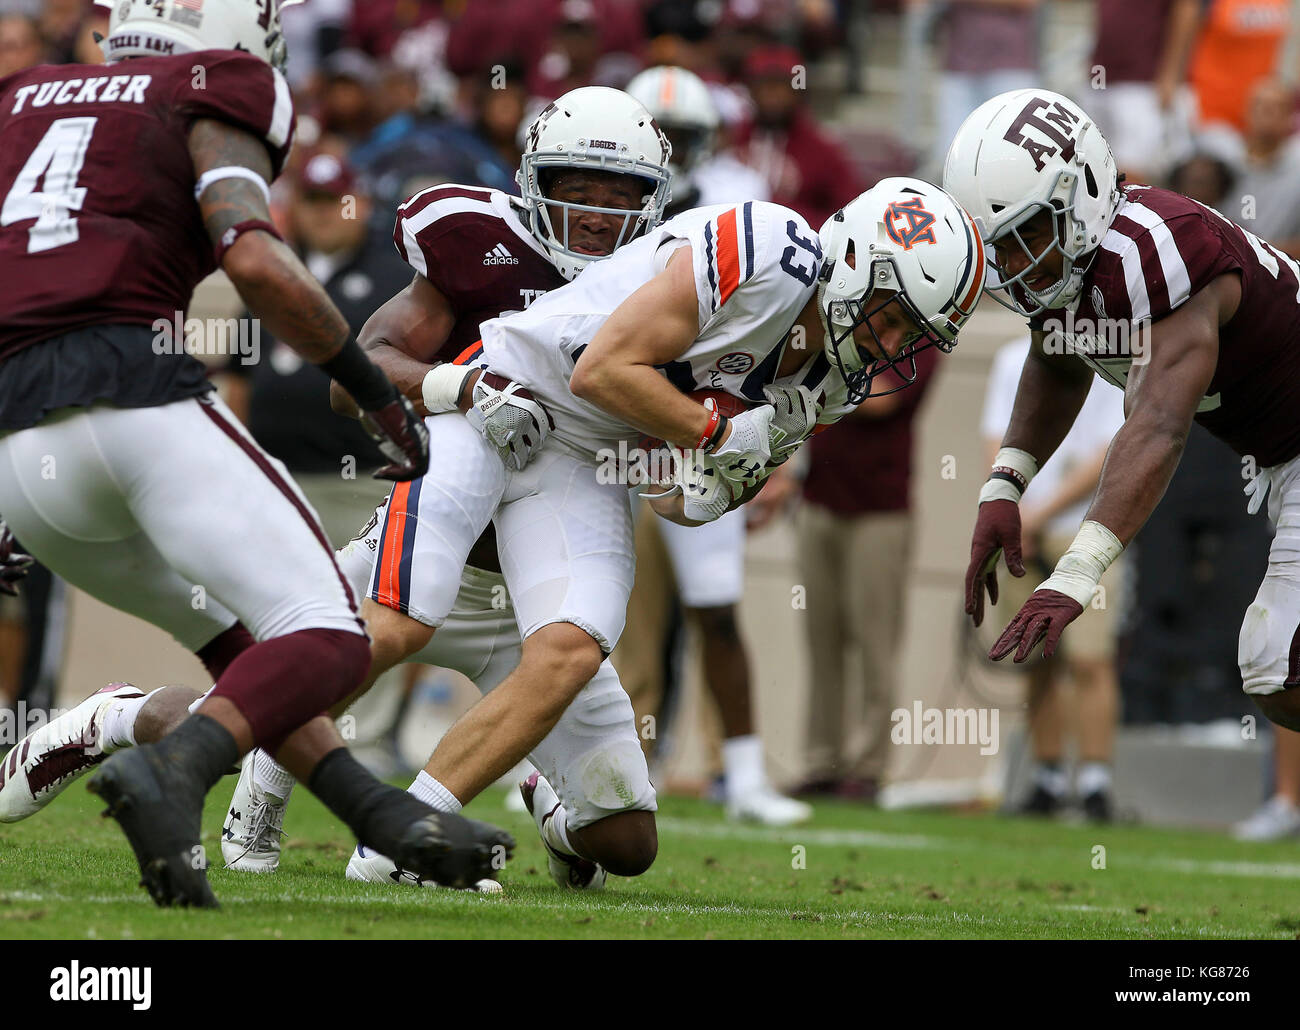 November 4, 2017: Auburn Tigers wide receiver Will Hastings (33) rushes for yards in the second quarter during the NCAA football game between the Auburn Tigers and the Texas A&M Aggies at Kyle Field in College Station, TX; John Glaser/CSM. Stock Photo